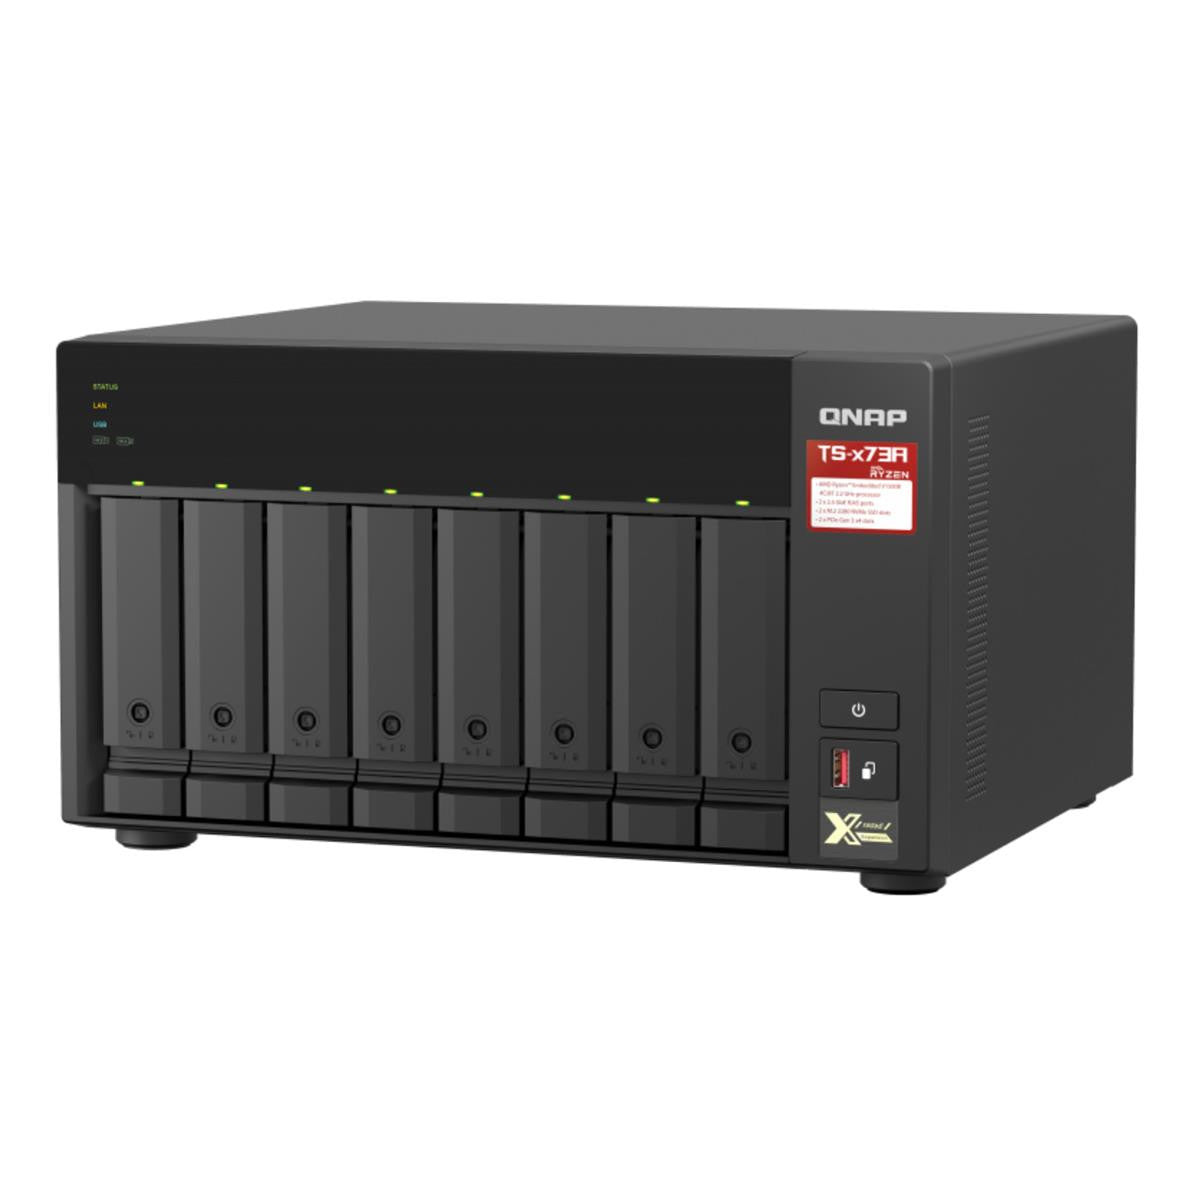 QNAP TS-873A 8-BAY NAS with 8GB DDR4 RAM and 16TB (8x2TB) Western Digital RED PLUS Drives Fully Assembled and Tested